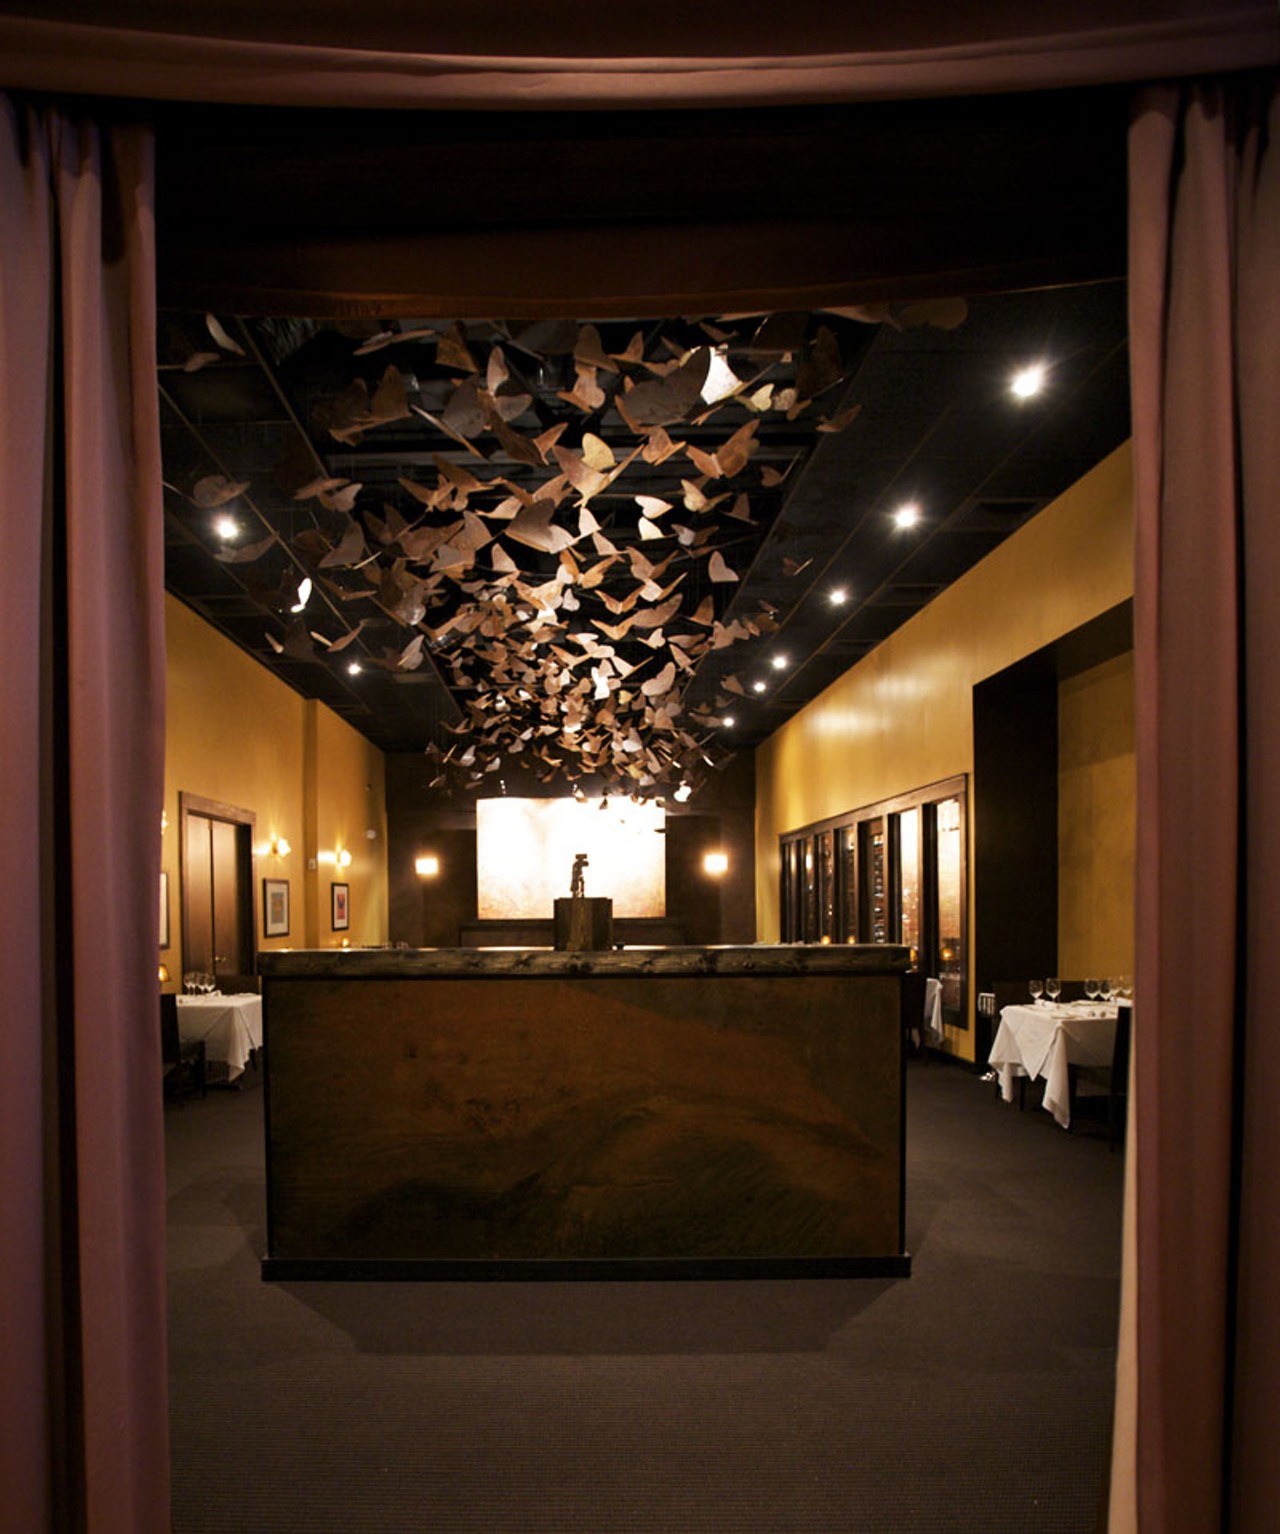 While Ian's review is of the Southern Bistro, we couldn&rsquo;t resist a peek into the main dining room with its 758 butterflies floating above head.